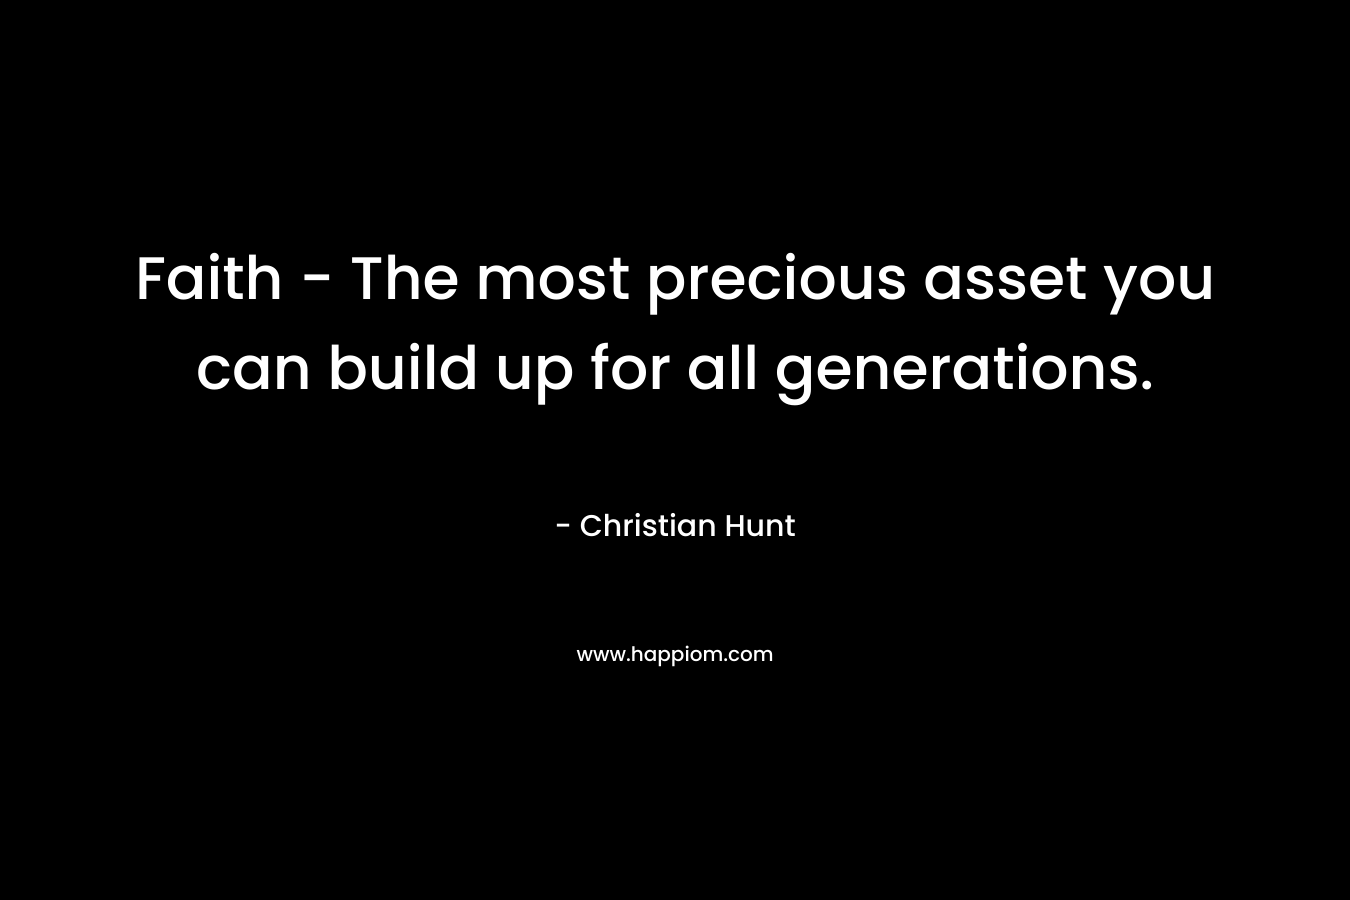 Faith - The most precious asset you can build up for all generations.